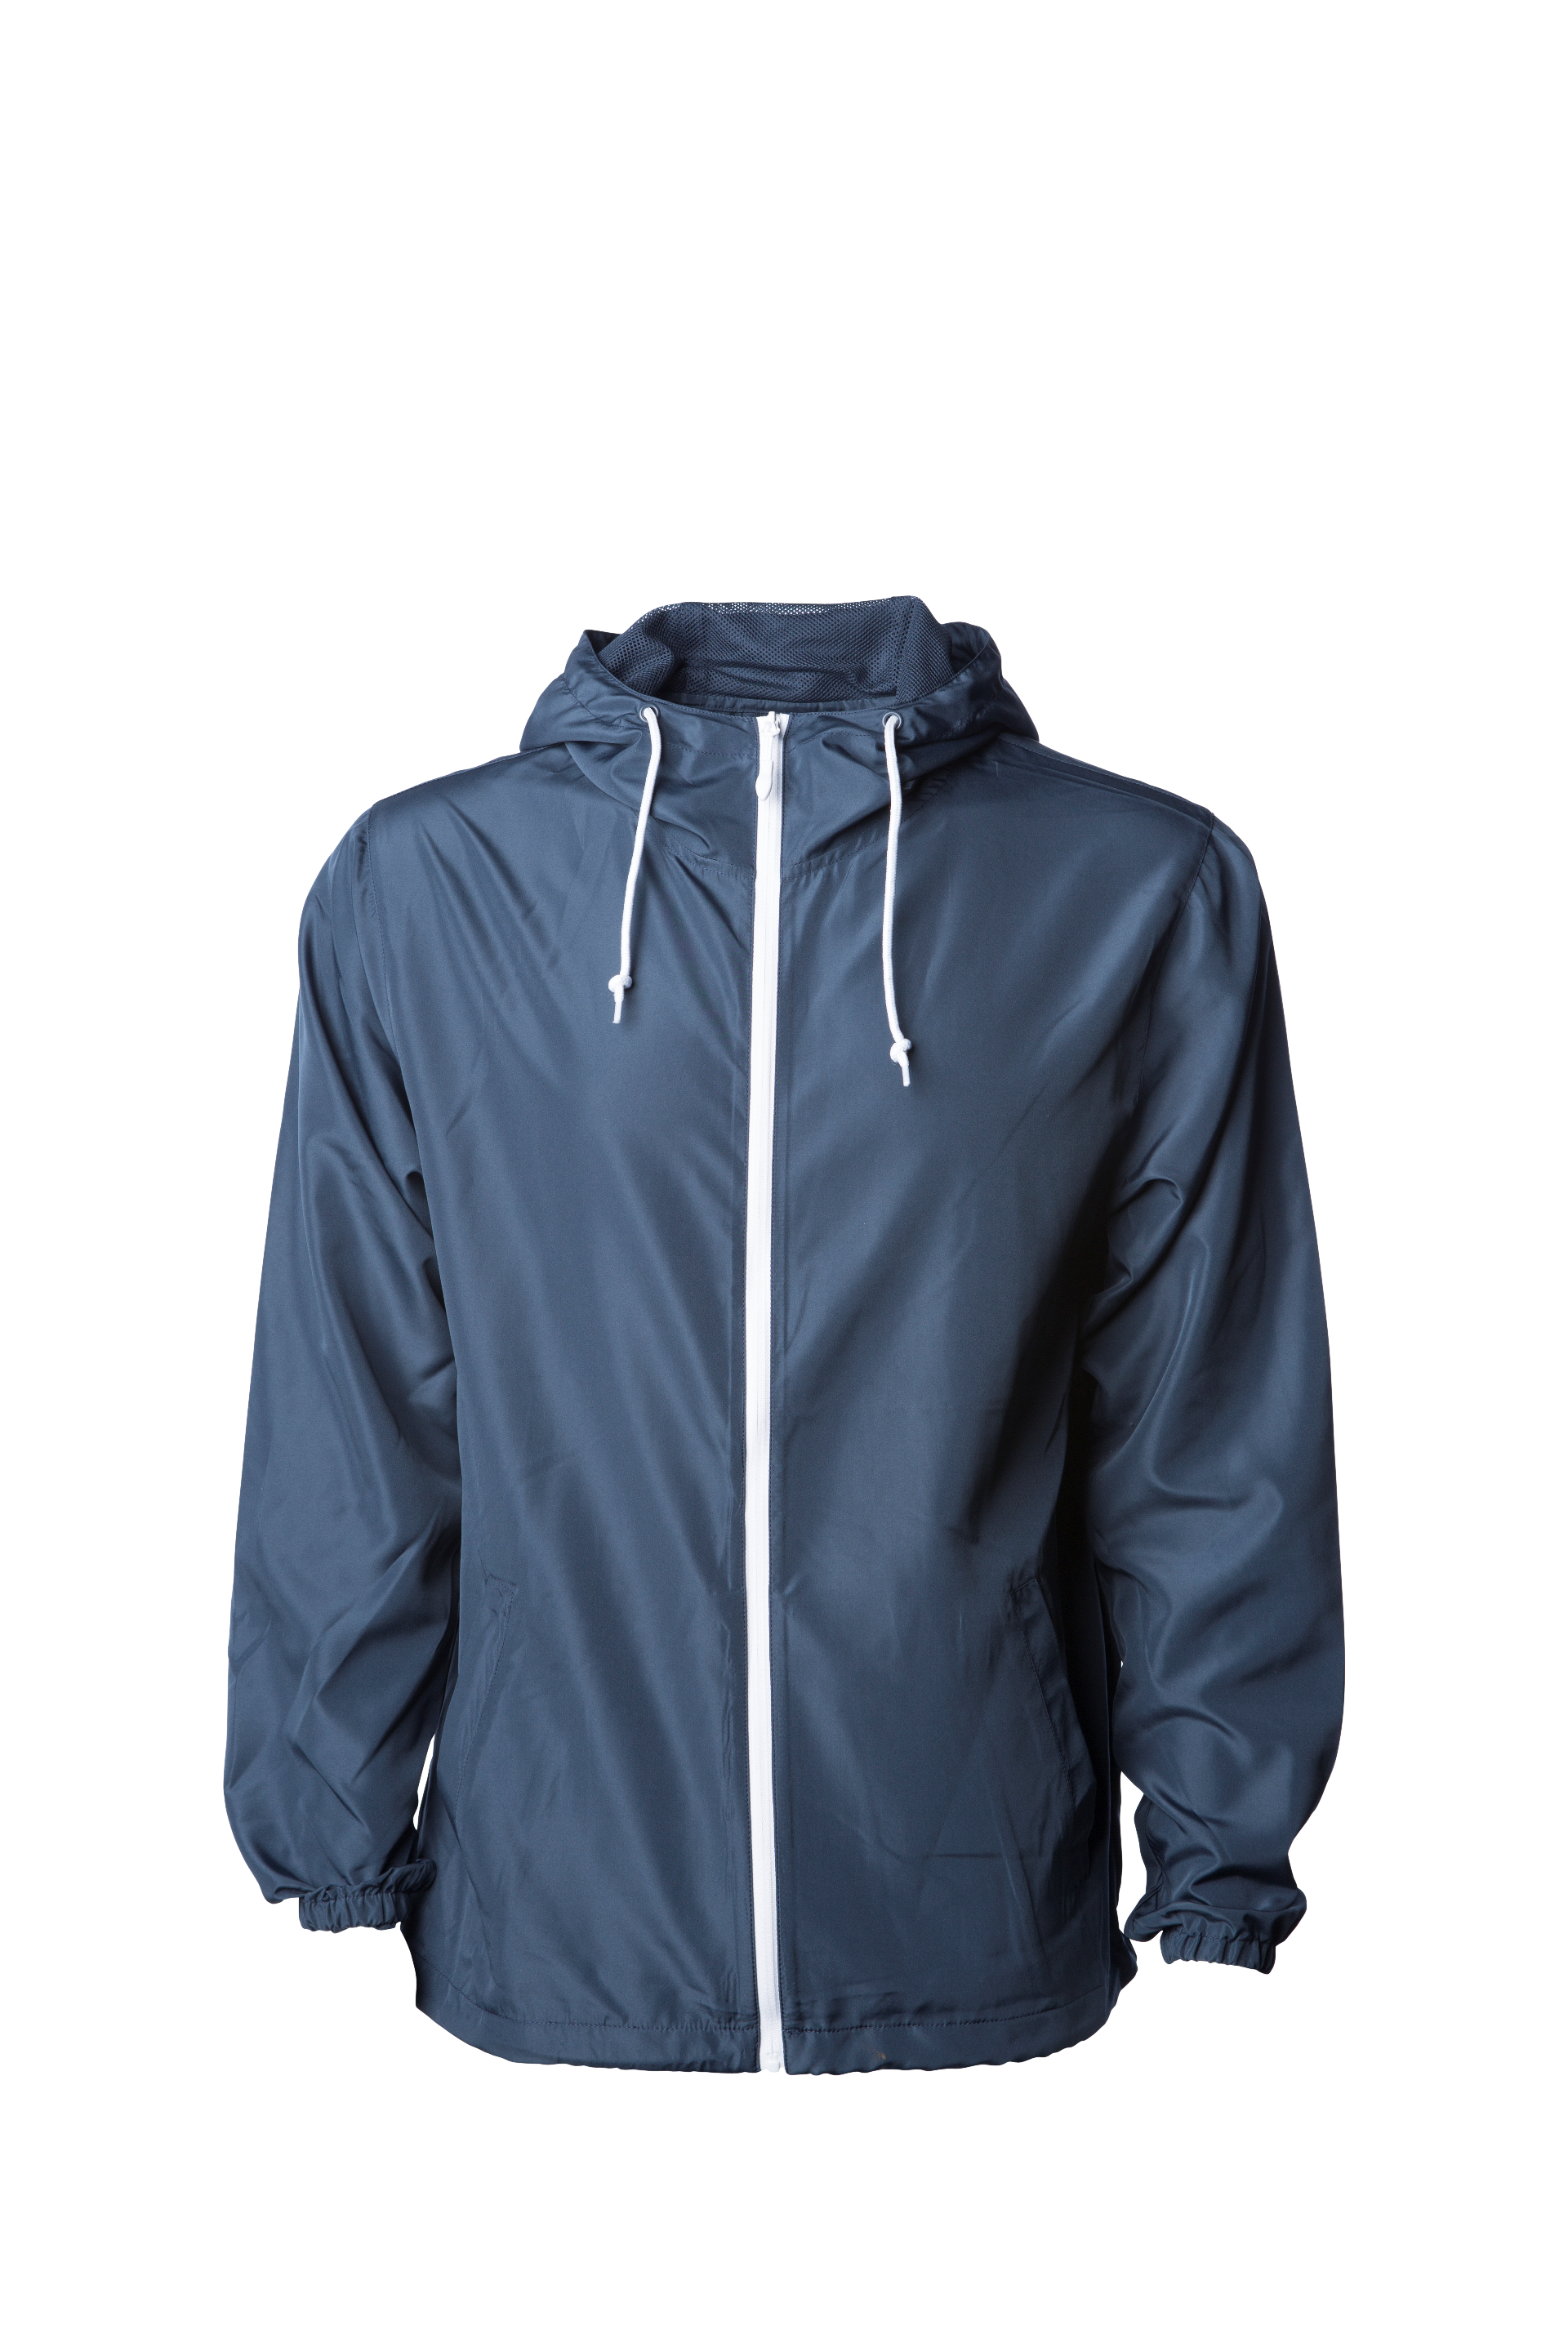 317Independent EXP54LWZ Lightweight Windbreaker-Classic-Navy-White 4mb ...